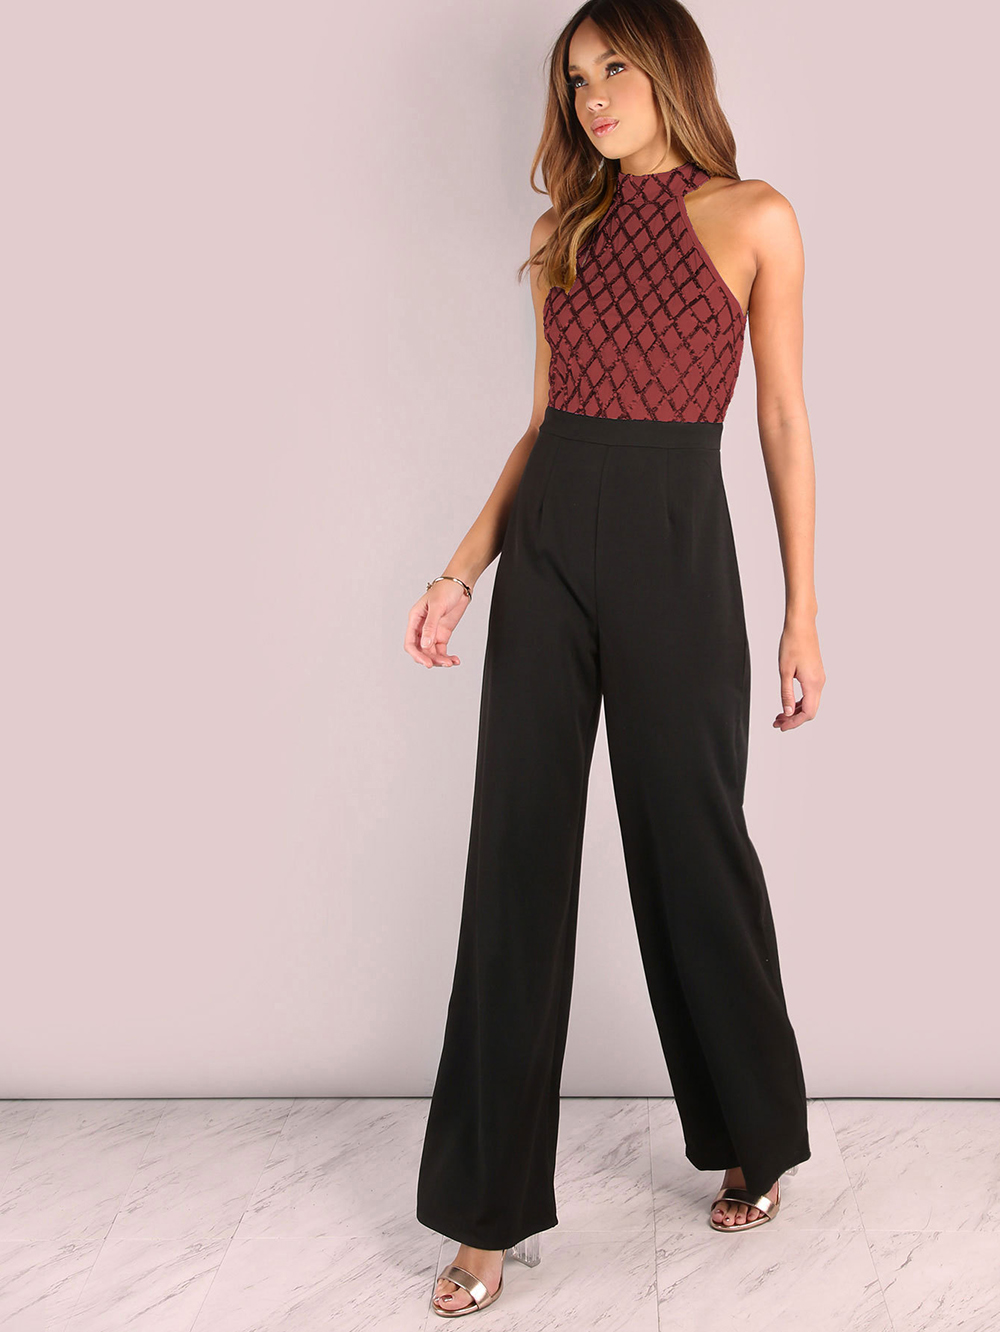 Sexy Sequined Stitching Sleeveless Slim Jumpsuit Long Flared Pants